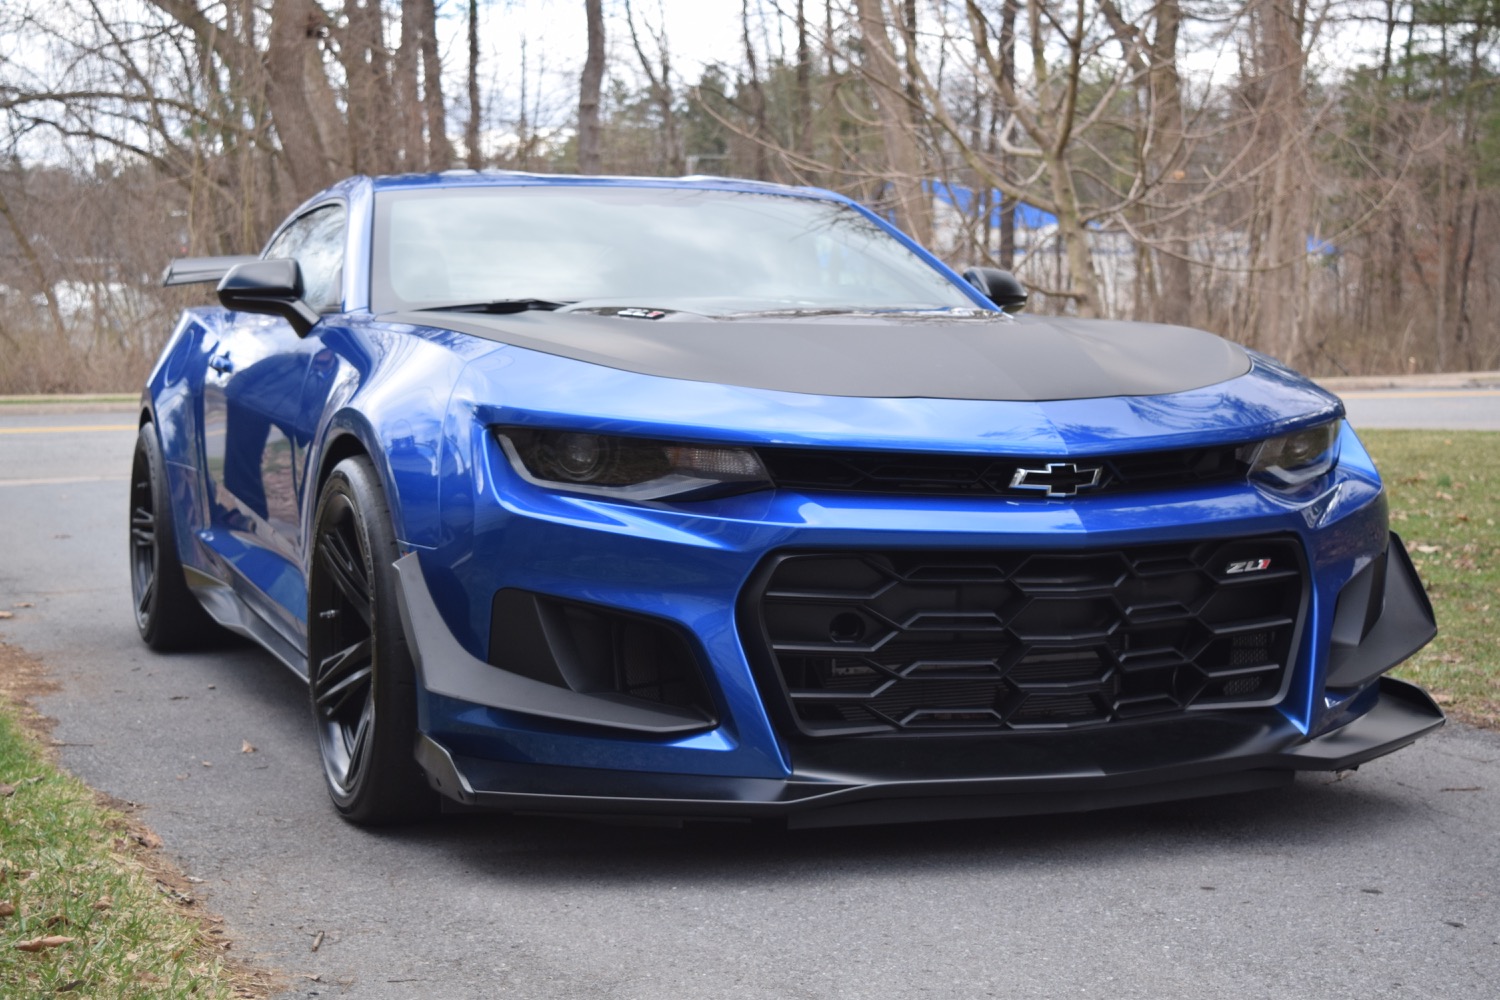 Purchasing The 2018 Chevrolet Camaro ZL1 1LE | GM Authority